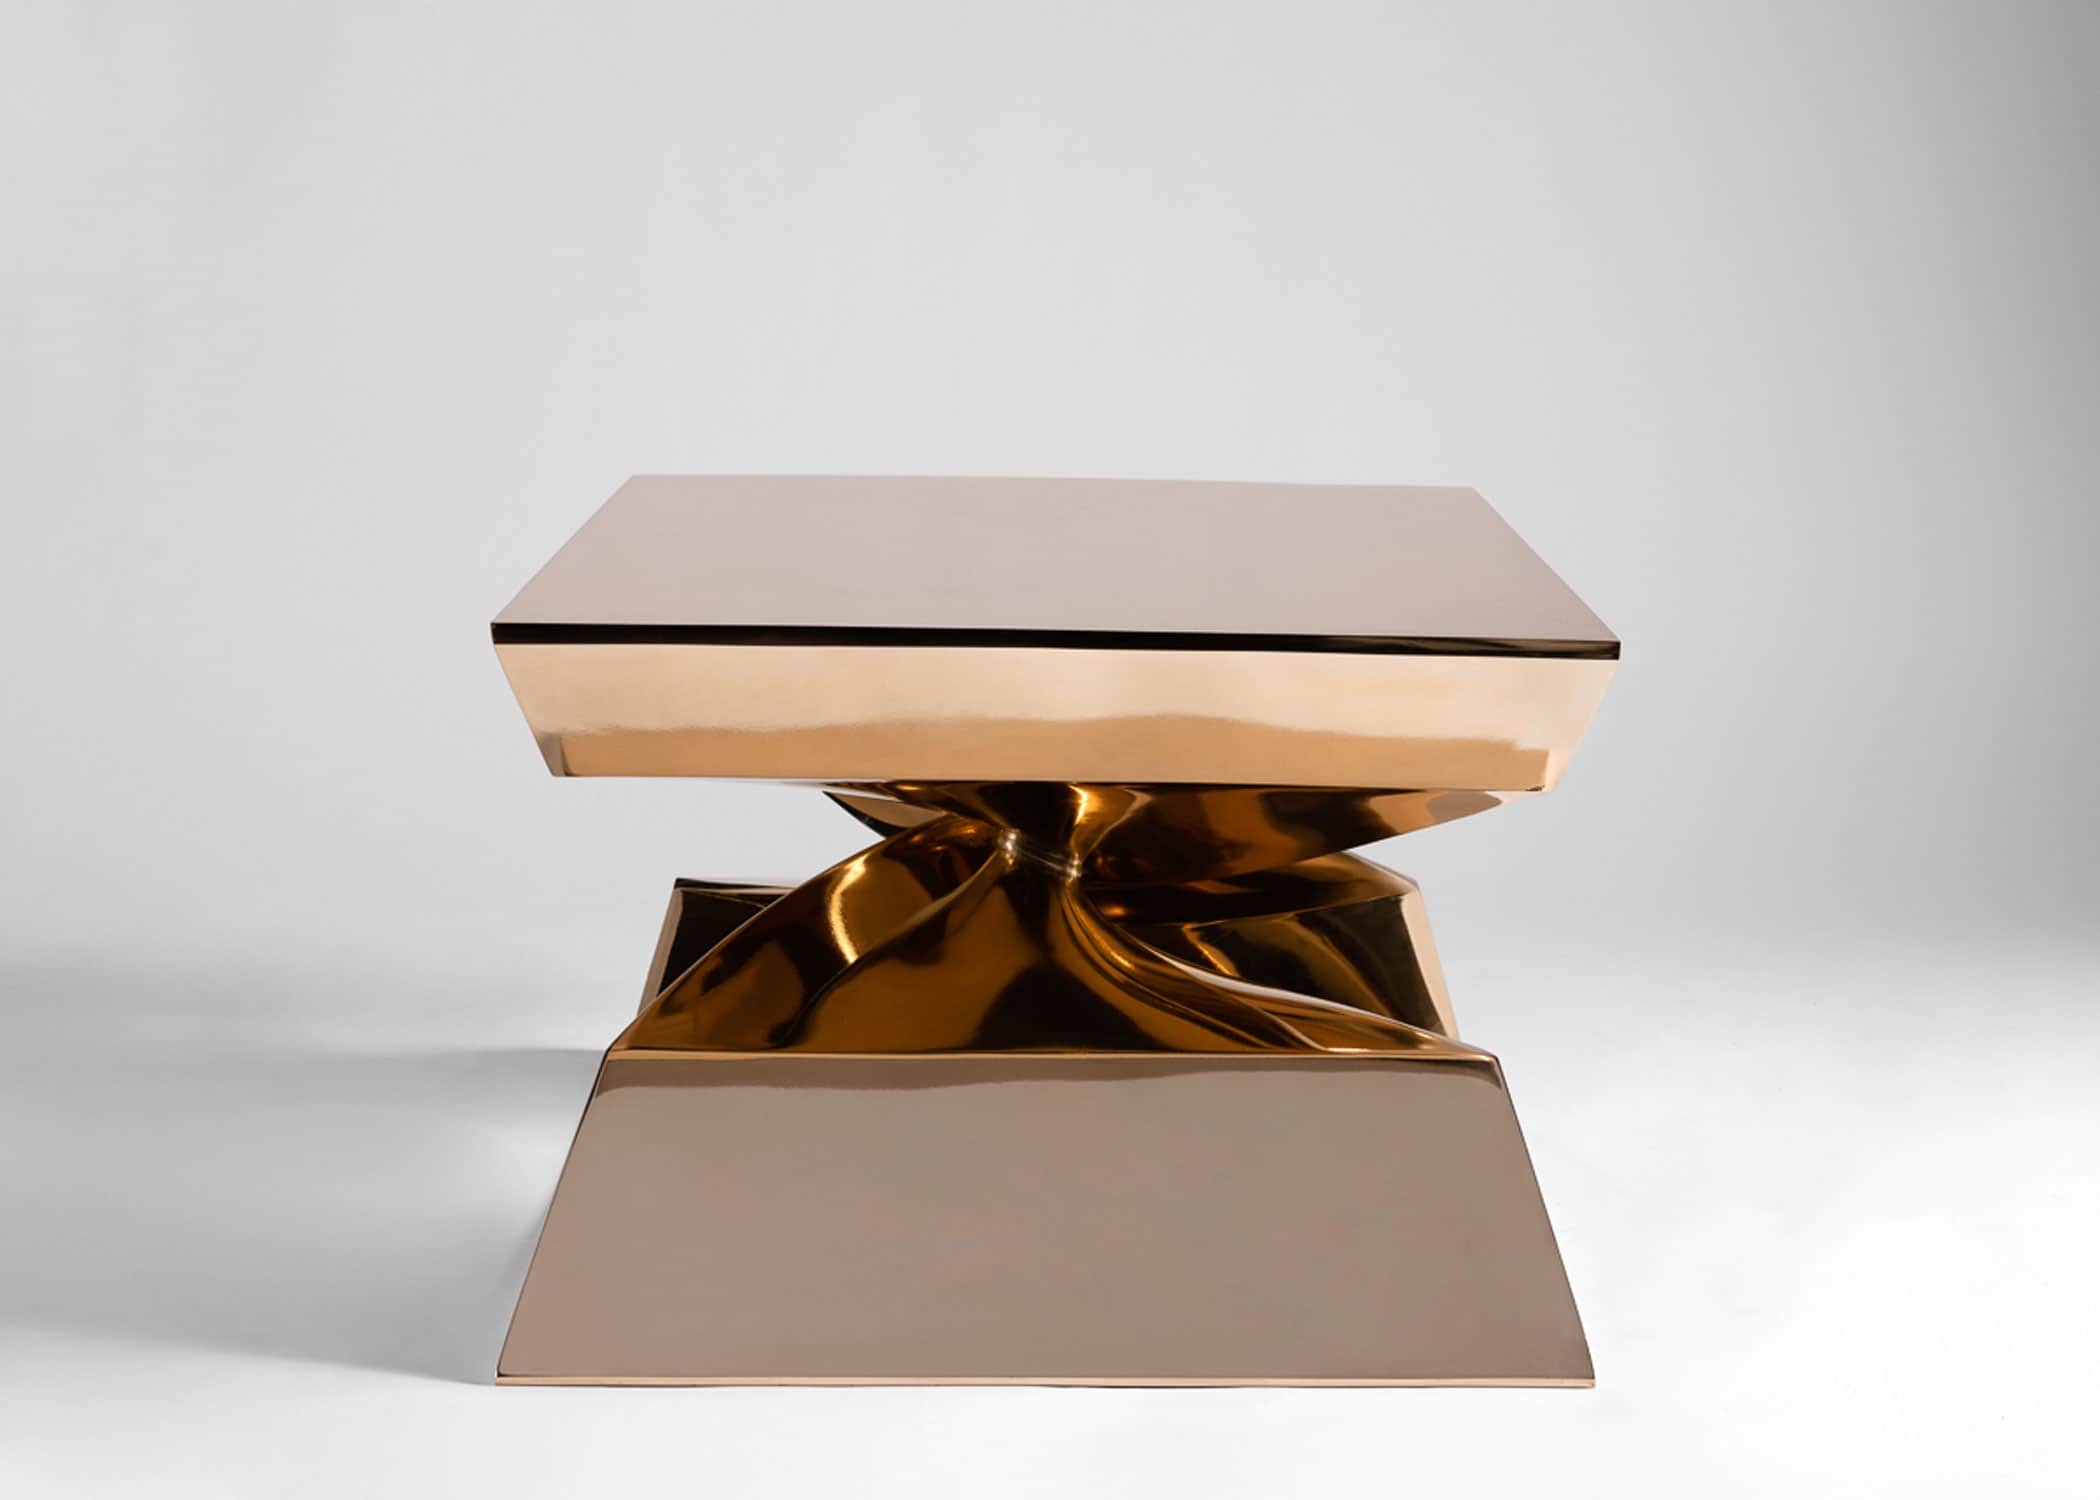 This image shows the large X shaped bronze Coffee Table designed by Carol Egan in a side profile.  The CE24 Cast silicon bronze X shaped coffee table has a mirror polished finish.  30"w x 24"d x 18"h.   The table is shown here against a grey background.